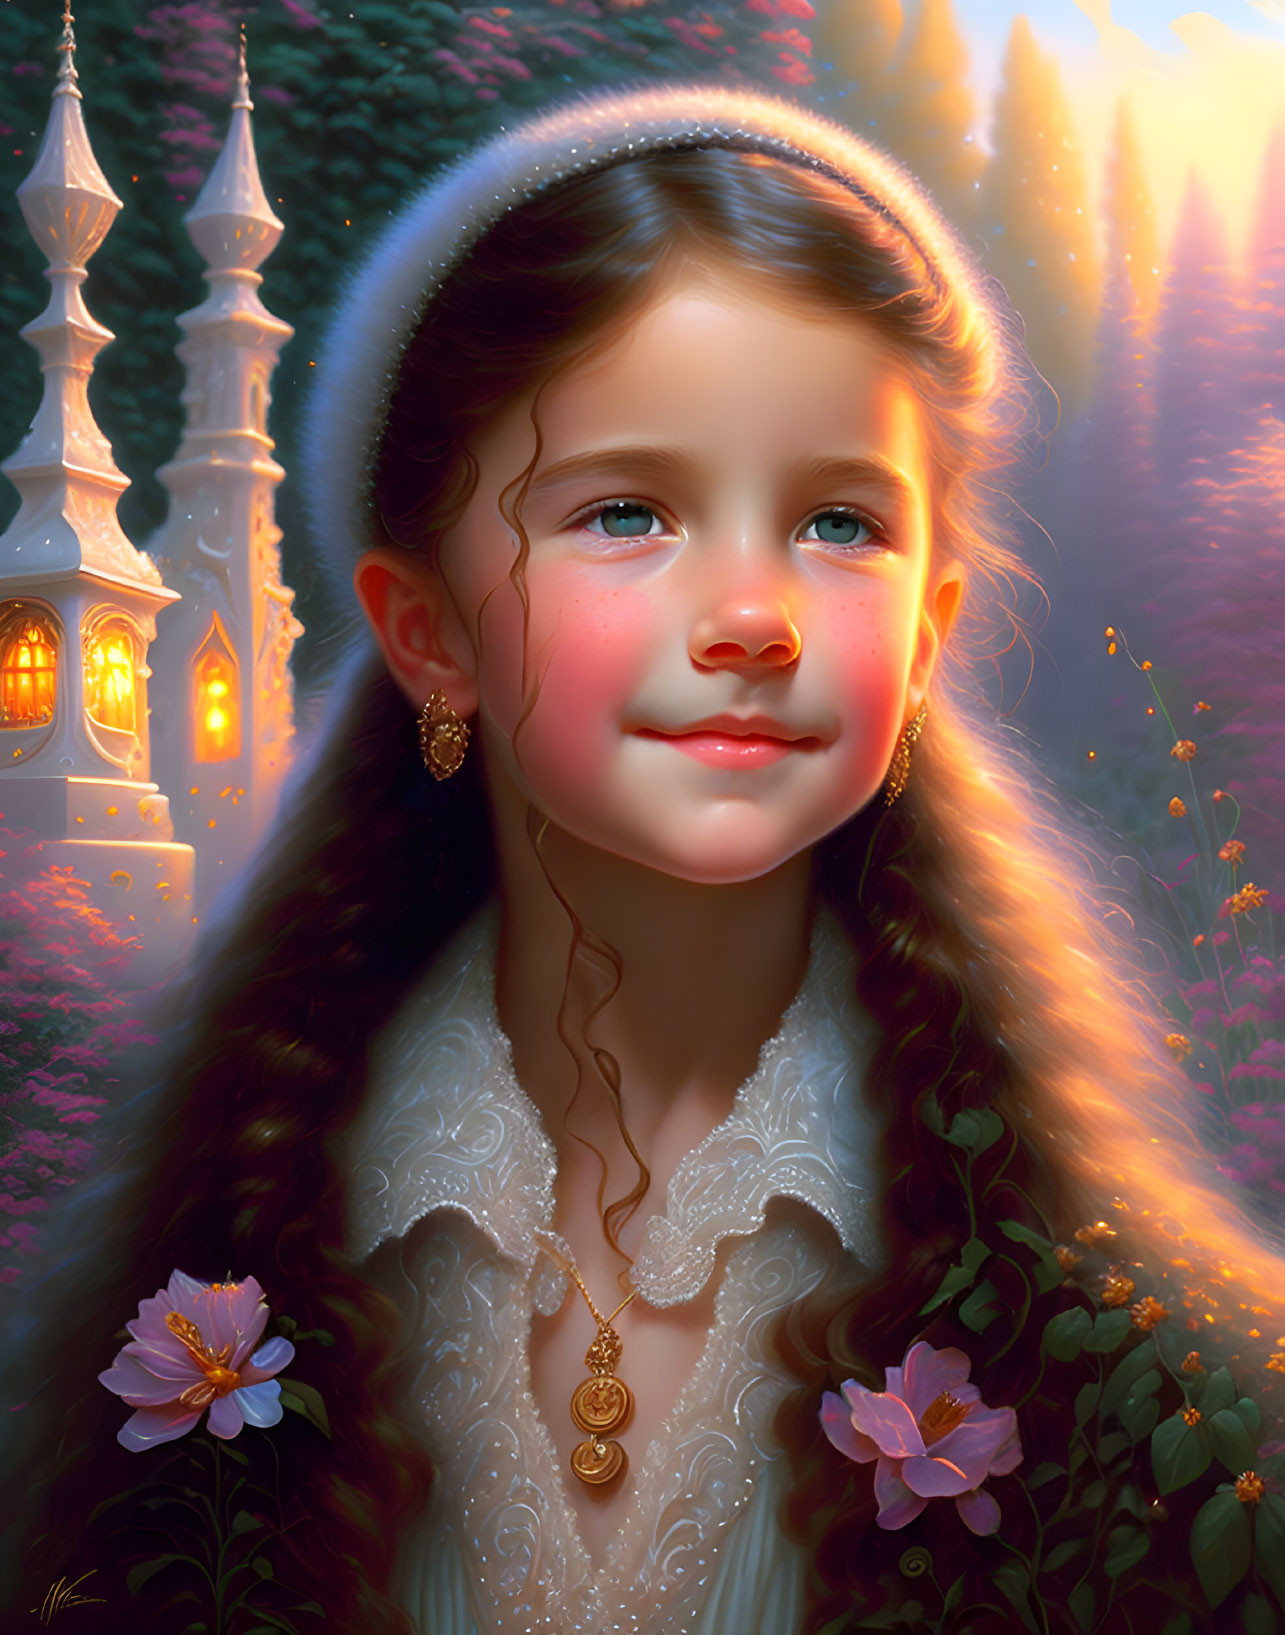 Digital painting of serene young girl with halo, ornate jewelry, white dress, illuminated flowers and towers